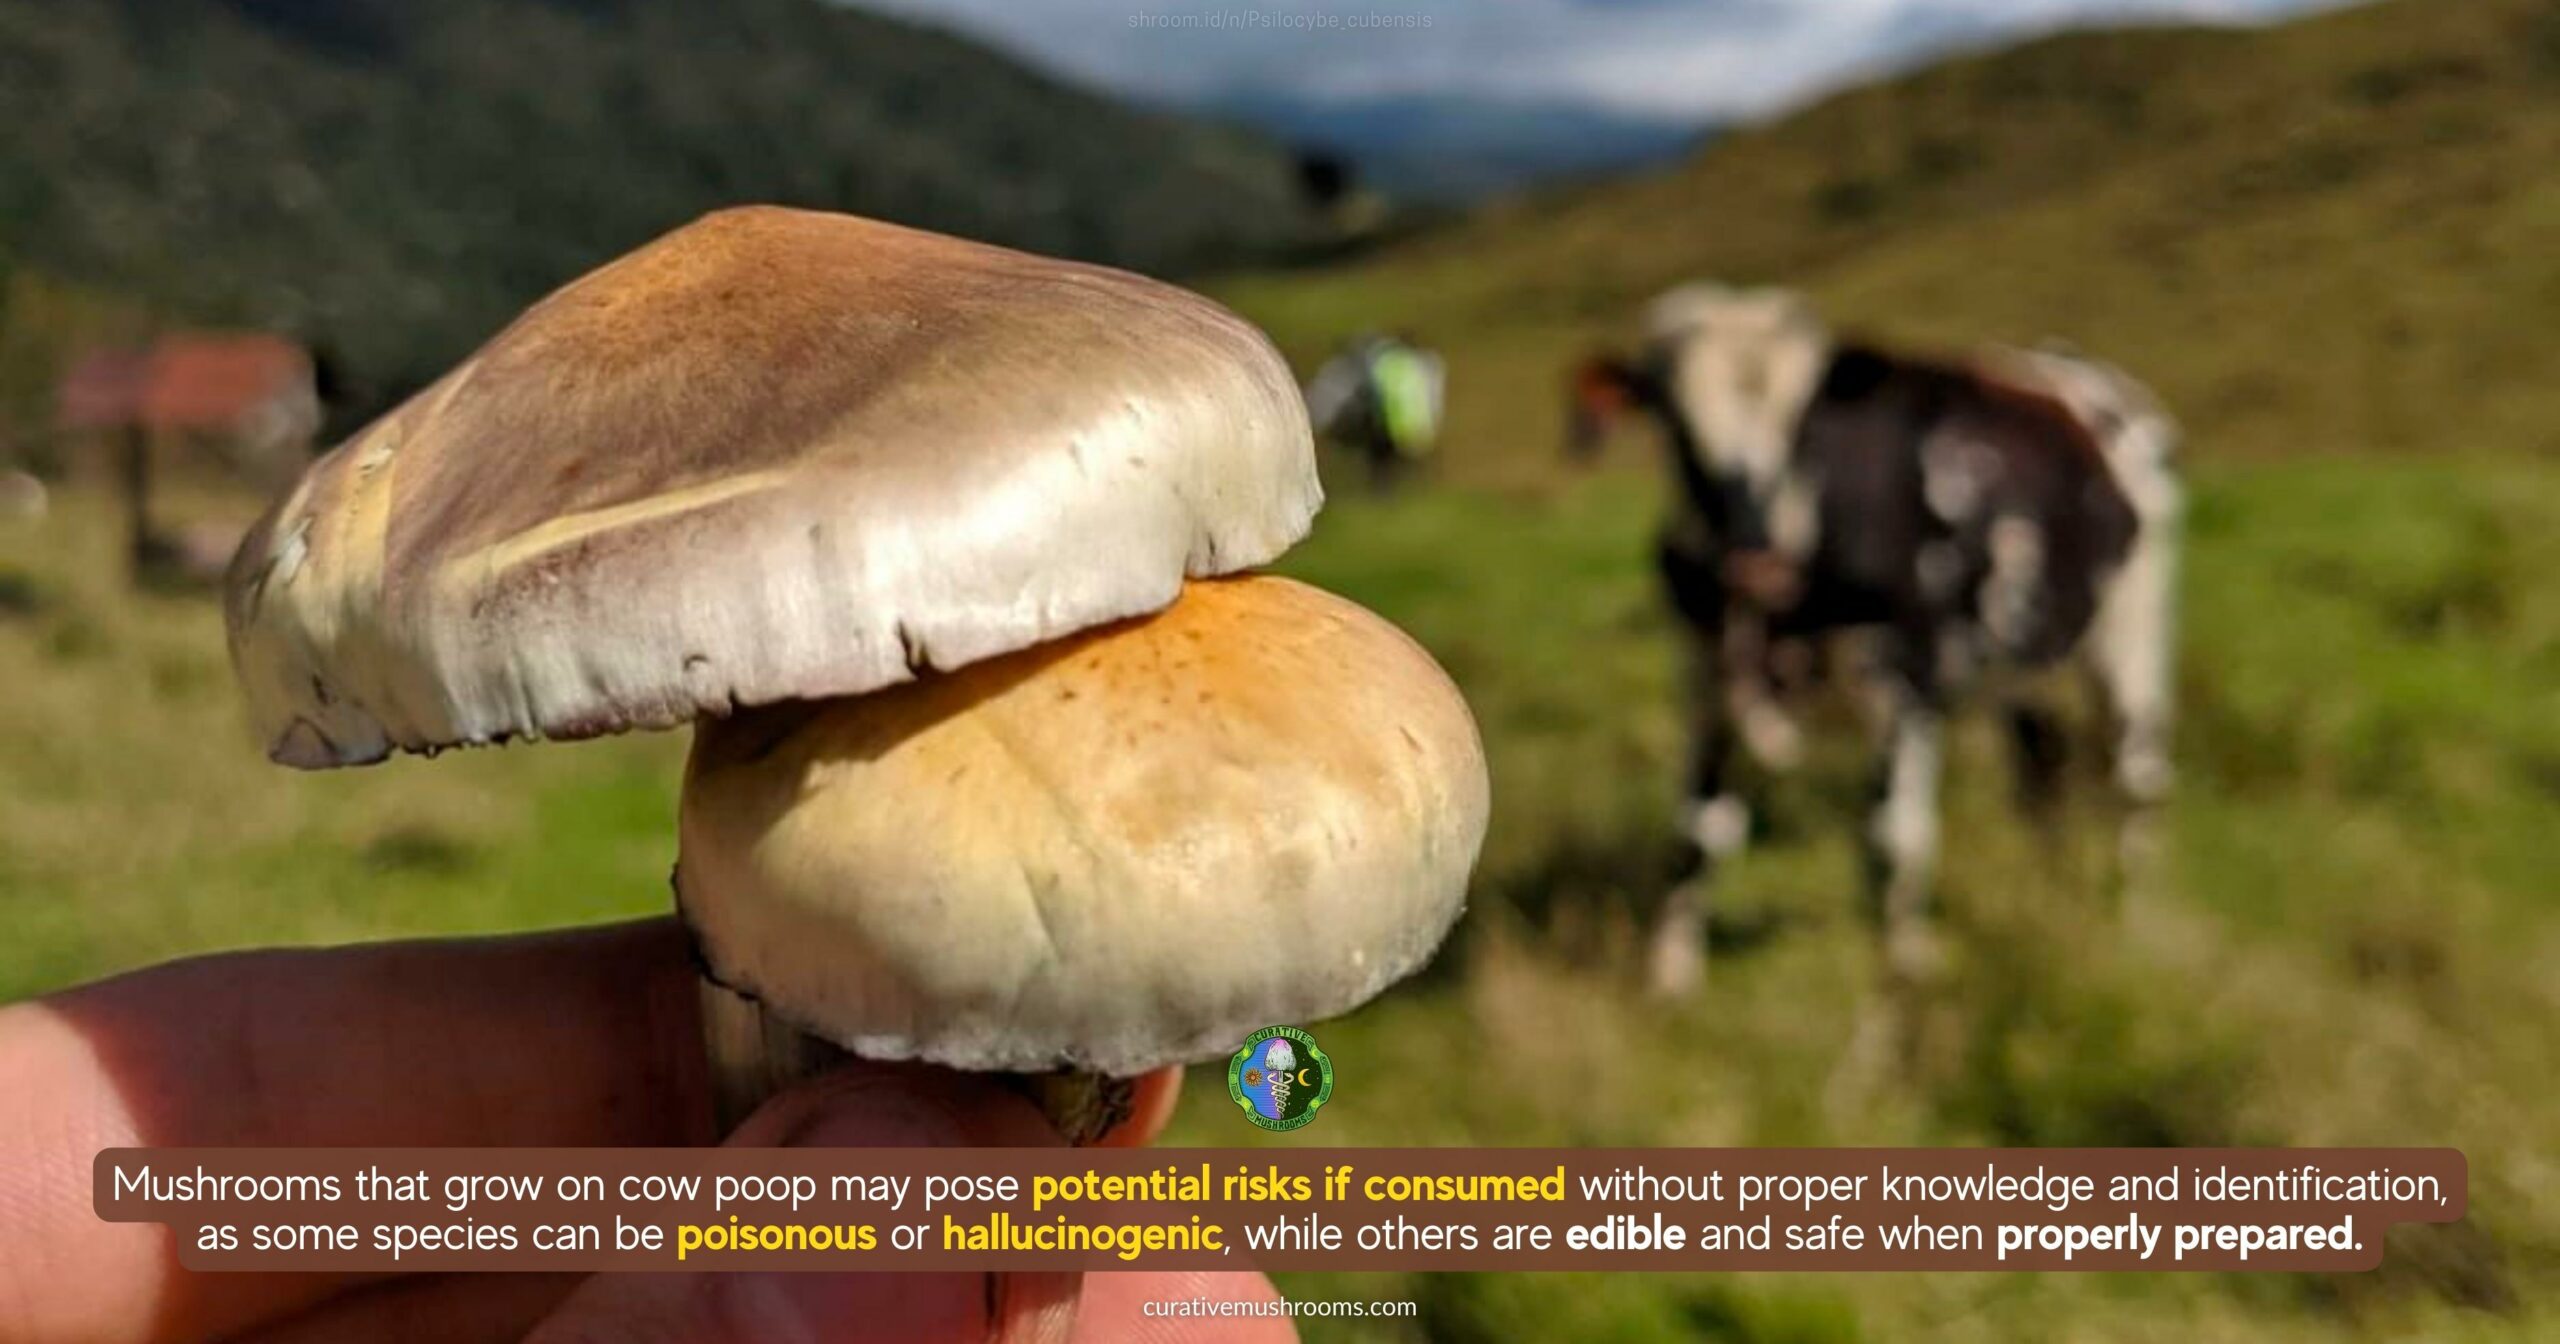 Are mushrooms that grow on cow poop safe to eat - potential risks if consumed without proper knowledge and identification - species can be poisonous or hallucinogenic